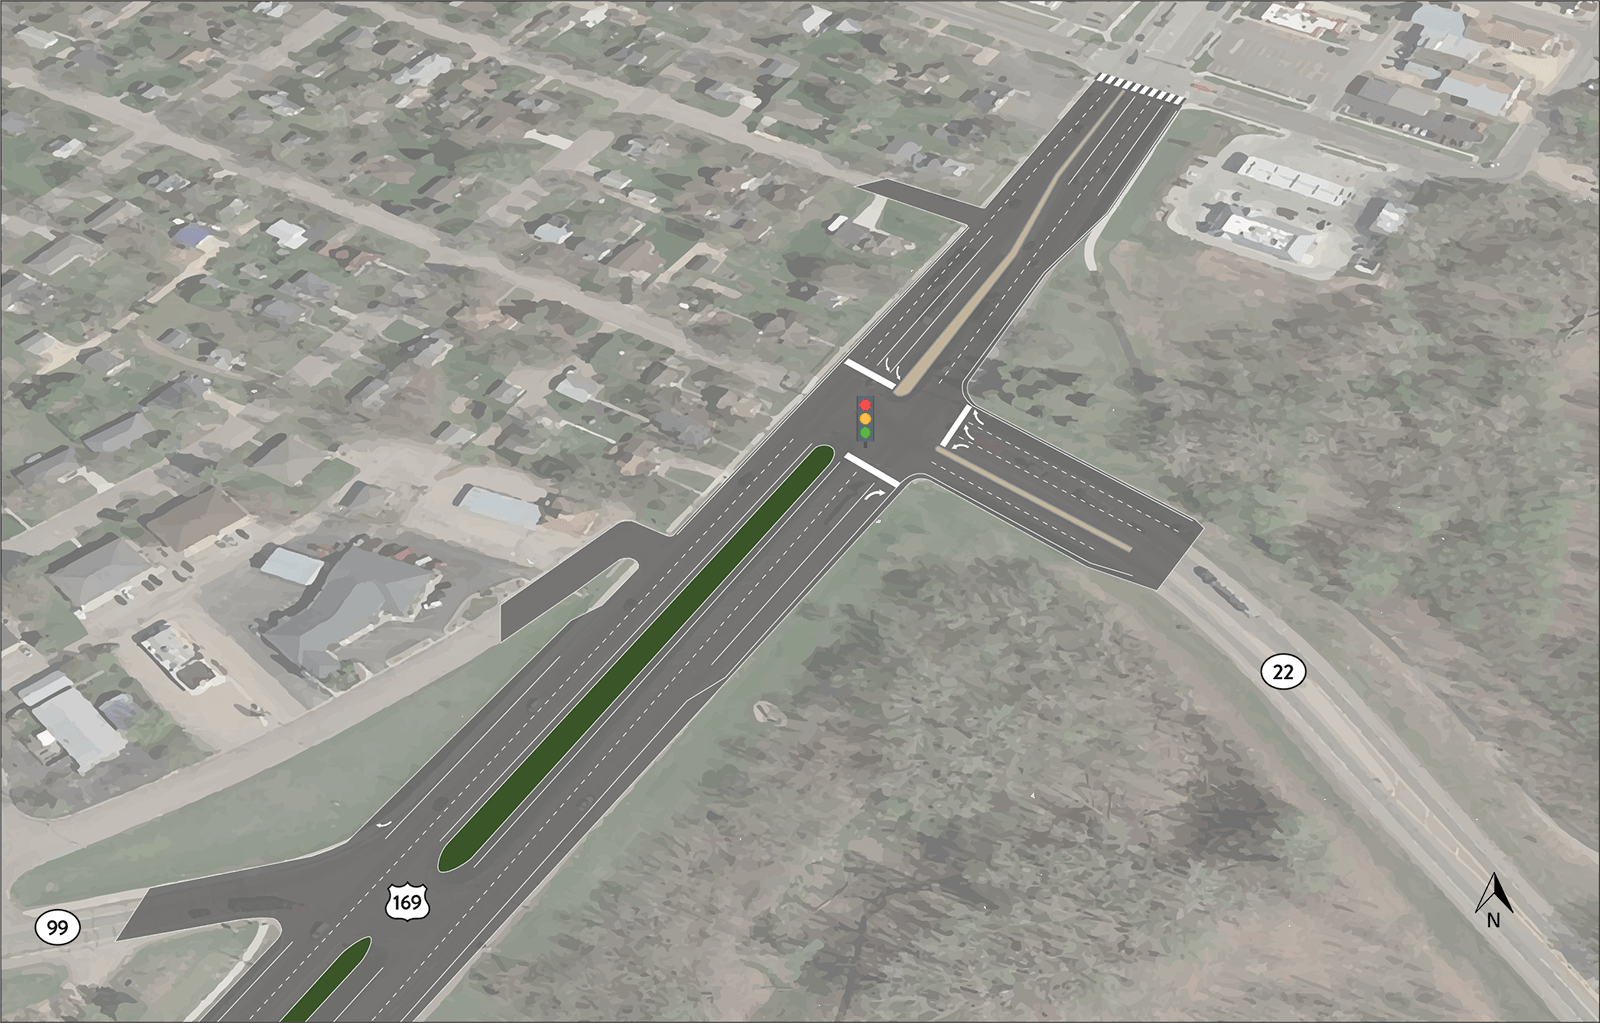 Illustration showing Concept A Build Alternative for Hwy 169, Hwy 22 and Hwy 99 in St. Peter, MN. Image shows the addition of a second SB Hwy 169 to EB Hwy 22 left turn lane.